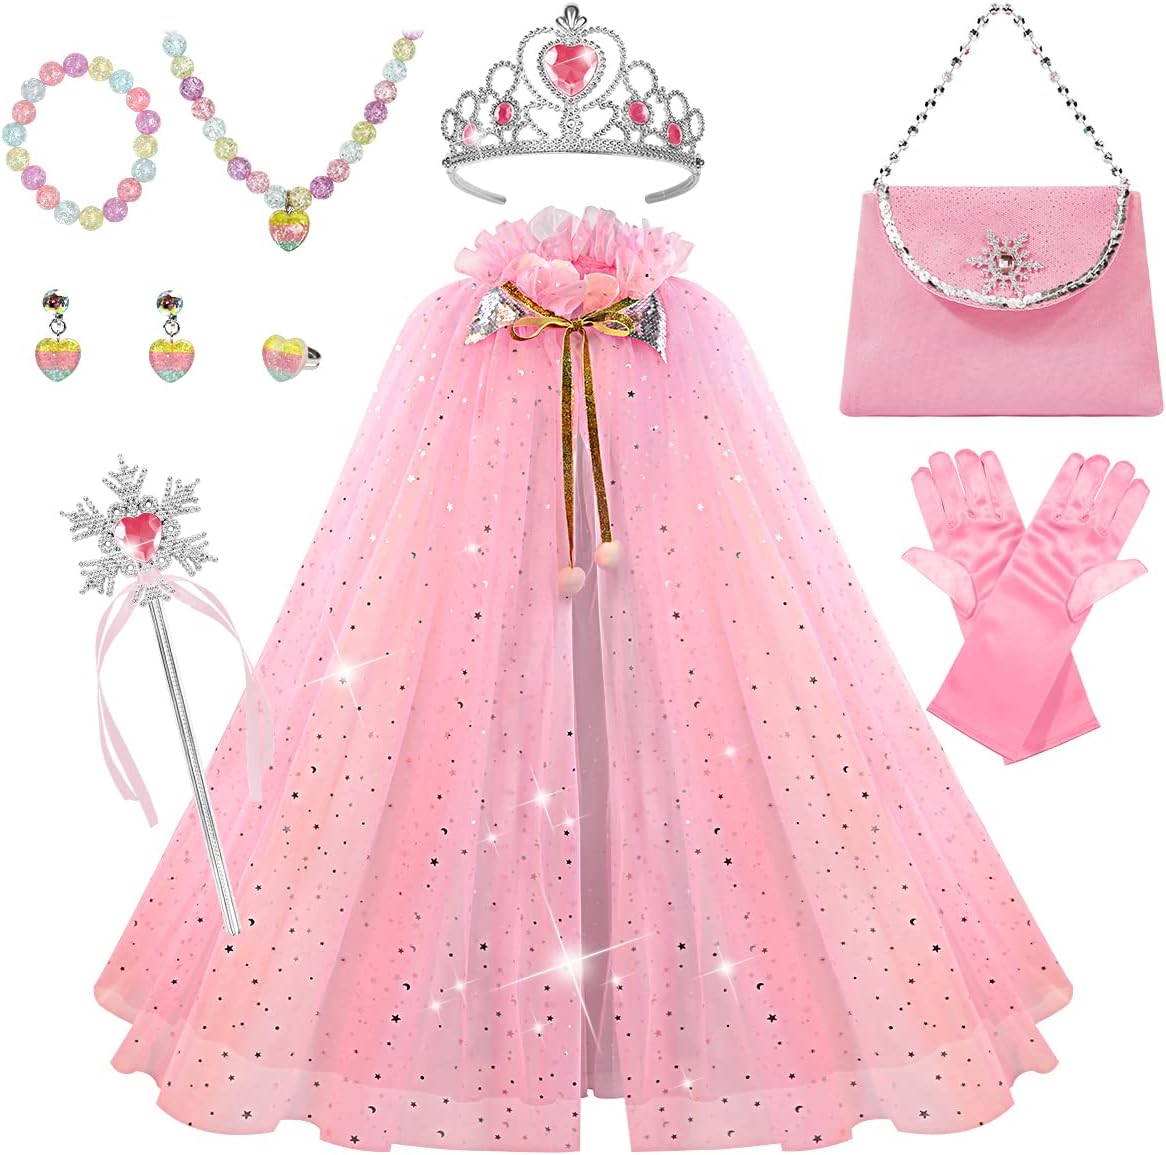 Princess Dress up Clothes for 3-8 Years Little Girl, 11Pcs Princess Cape with Crown